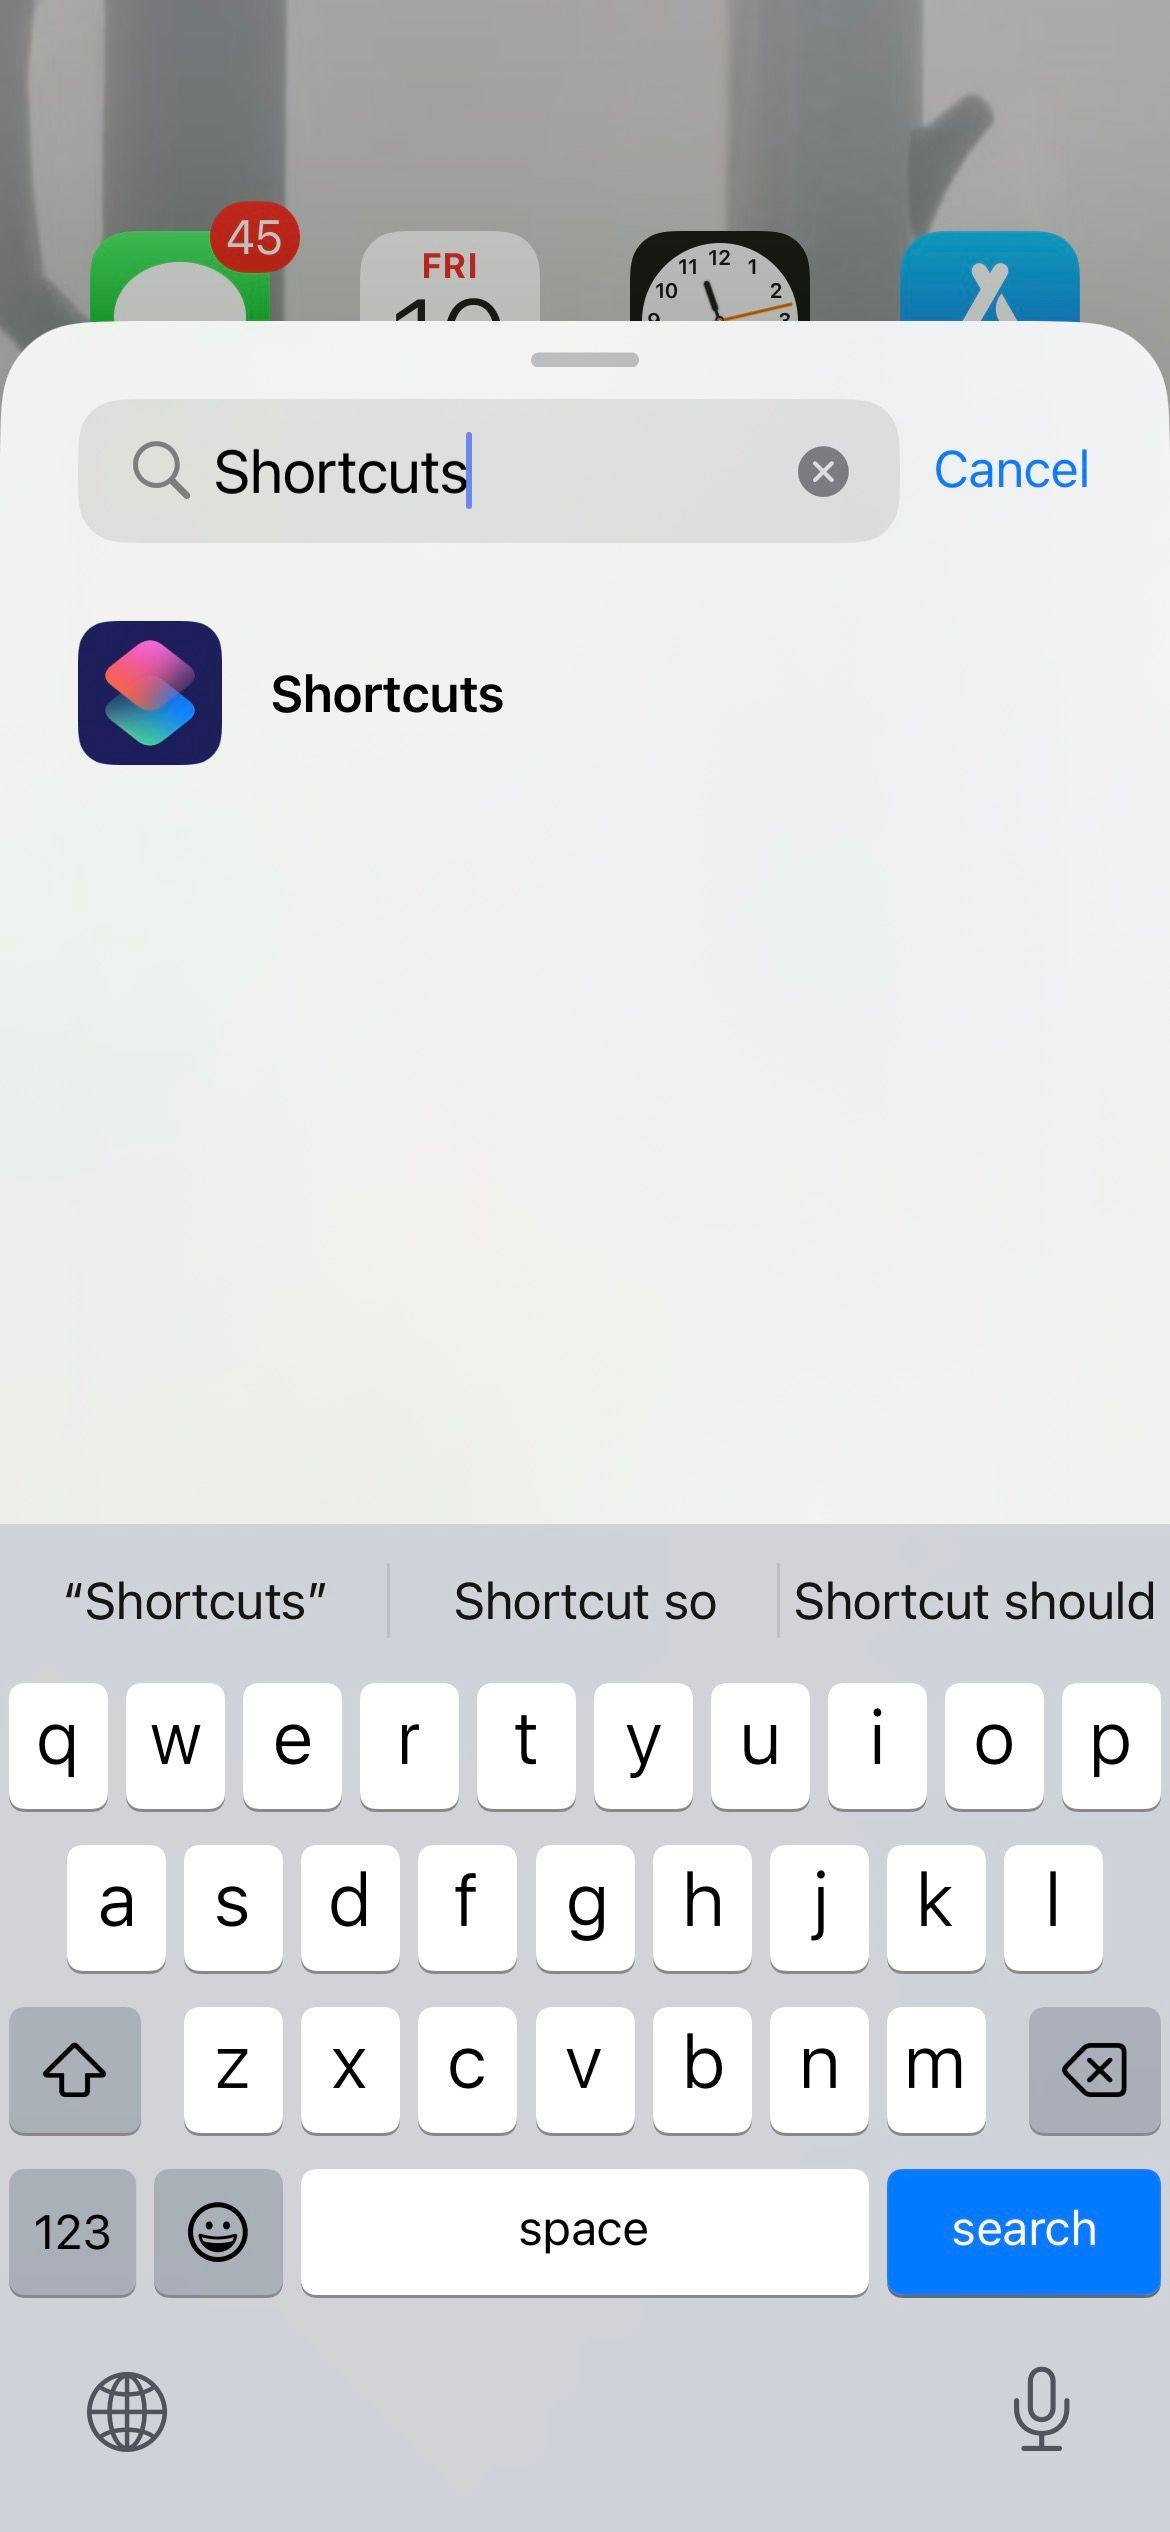 6 Quick Ways to Run Shortcuts on Your iPhone